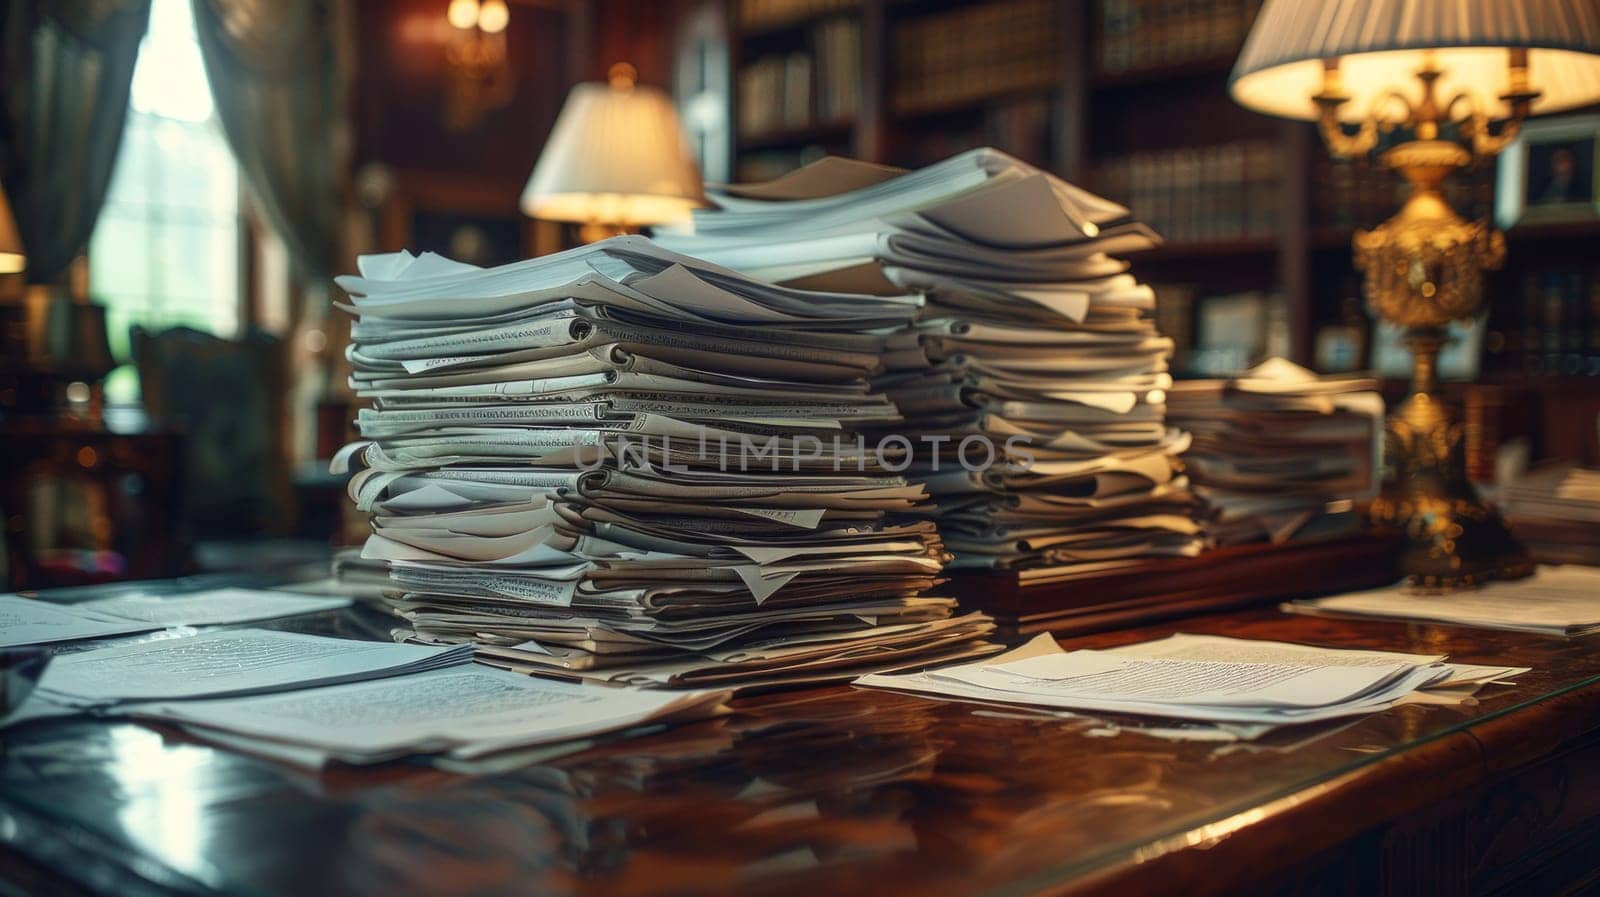 A towering stack of papers dominates the rustic wooden desk, creating an impressive display of work and information.